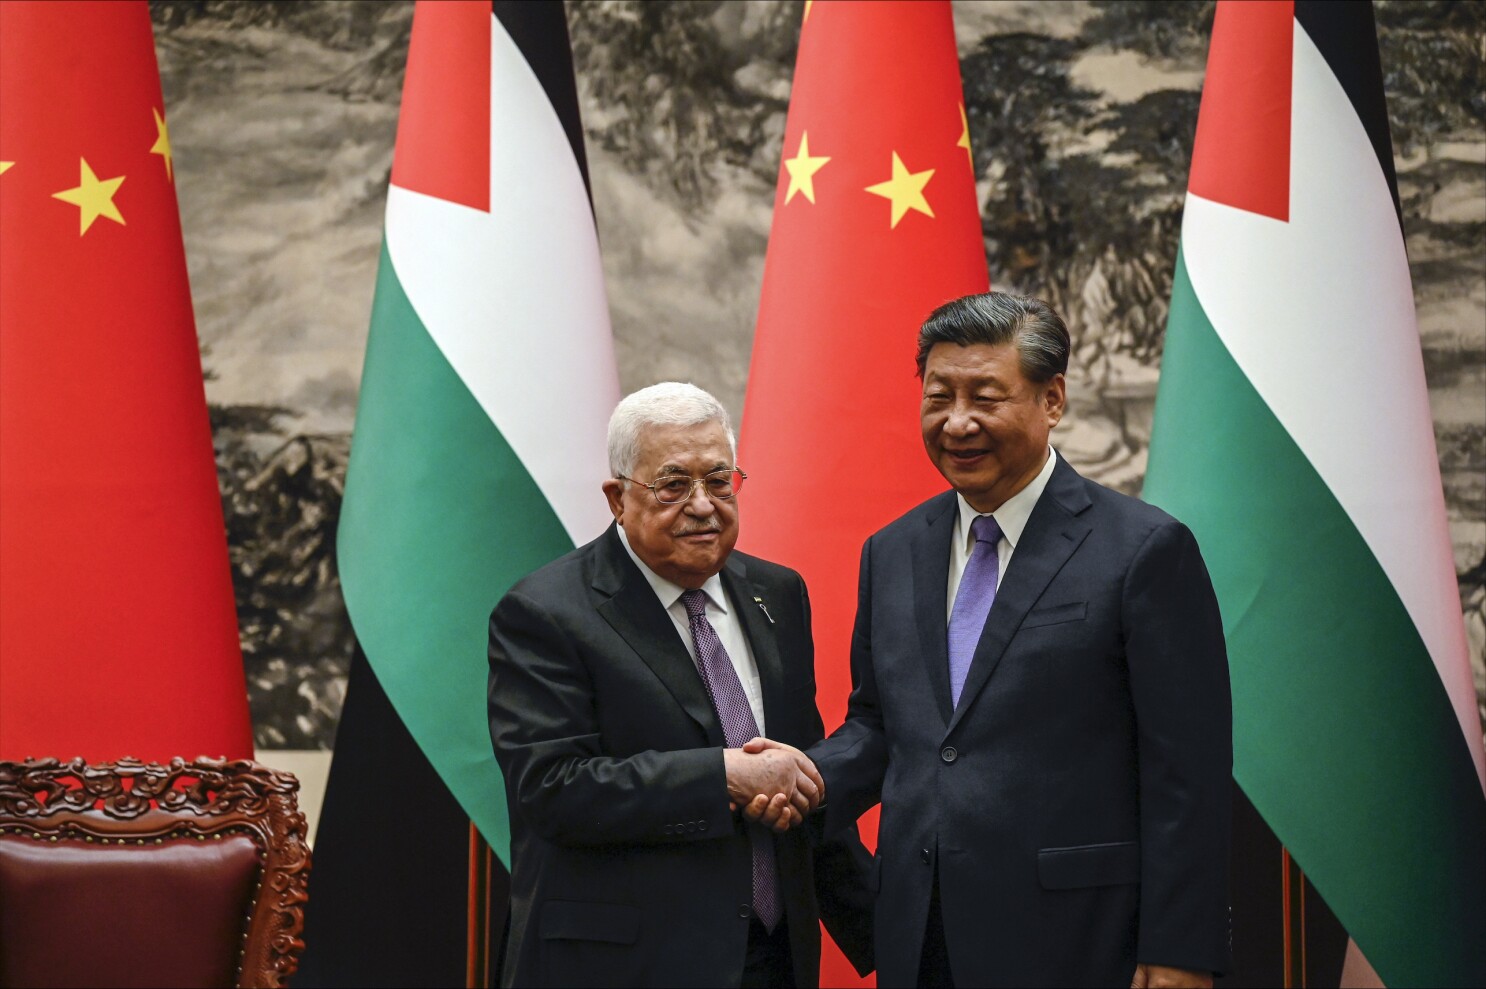 Israel-Hamas conflict tests limits of China's approach to the Middle East